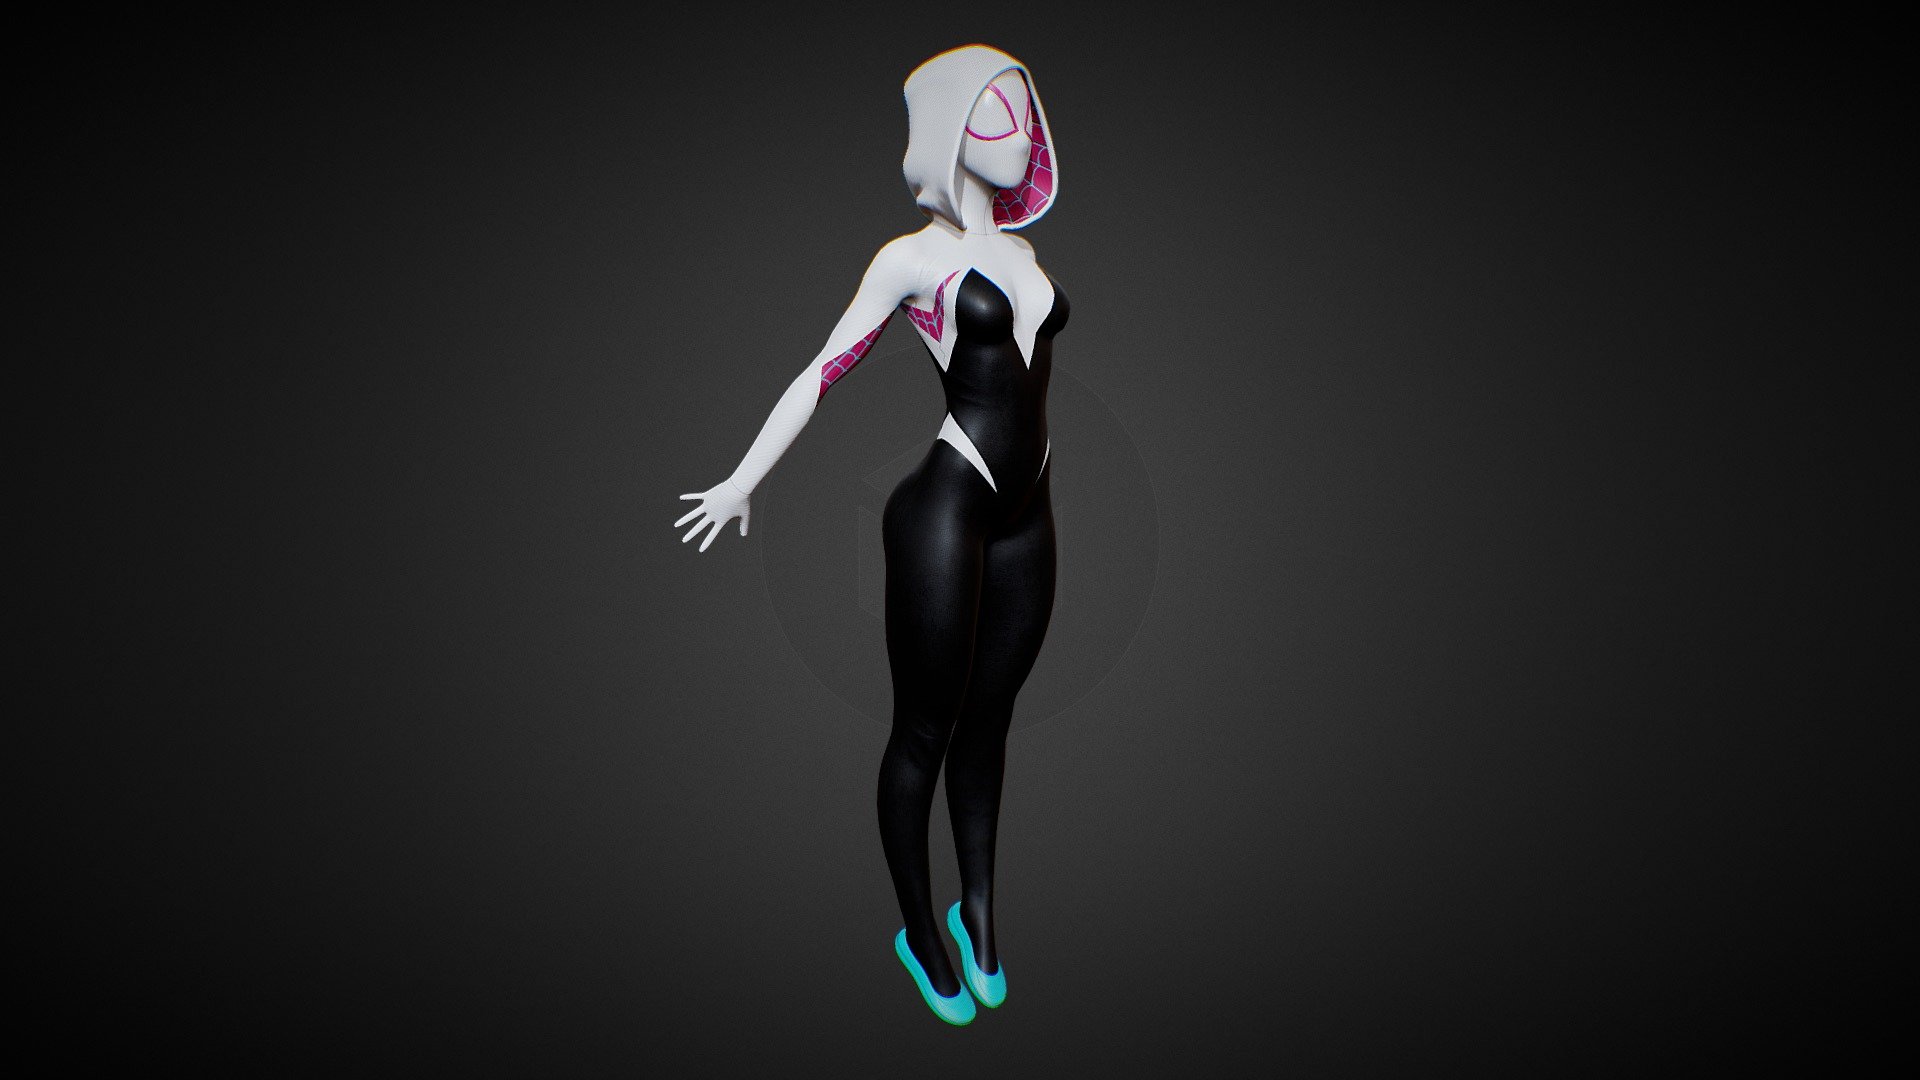 Spider-Gwen is a comic books character published by Marvel Comics.




Model was made on Maya, Zbrush, substance painter and Blender.

Inspired by Spiderman into the spider verse gwen stacy suit.

The model has a Gwen stacy spider-woman suit.

High quality texture work.

The model comes with complete 4k textures and Blender, FBX And OBJ file formats

The model has 3 materials all materials contains 5 maps Basecolor, Roughness, Metalness, Normal and Ao

All textures and materials are included and mapped. (4k resoulutions)

No special plugin needed to open scene

The model can be rigg easily
 - Gwen Stacy - Buy Royalty Free 3D model by AFSHAN ALI (@Aliflex) 3d model